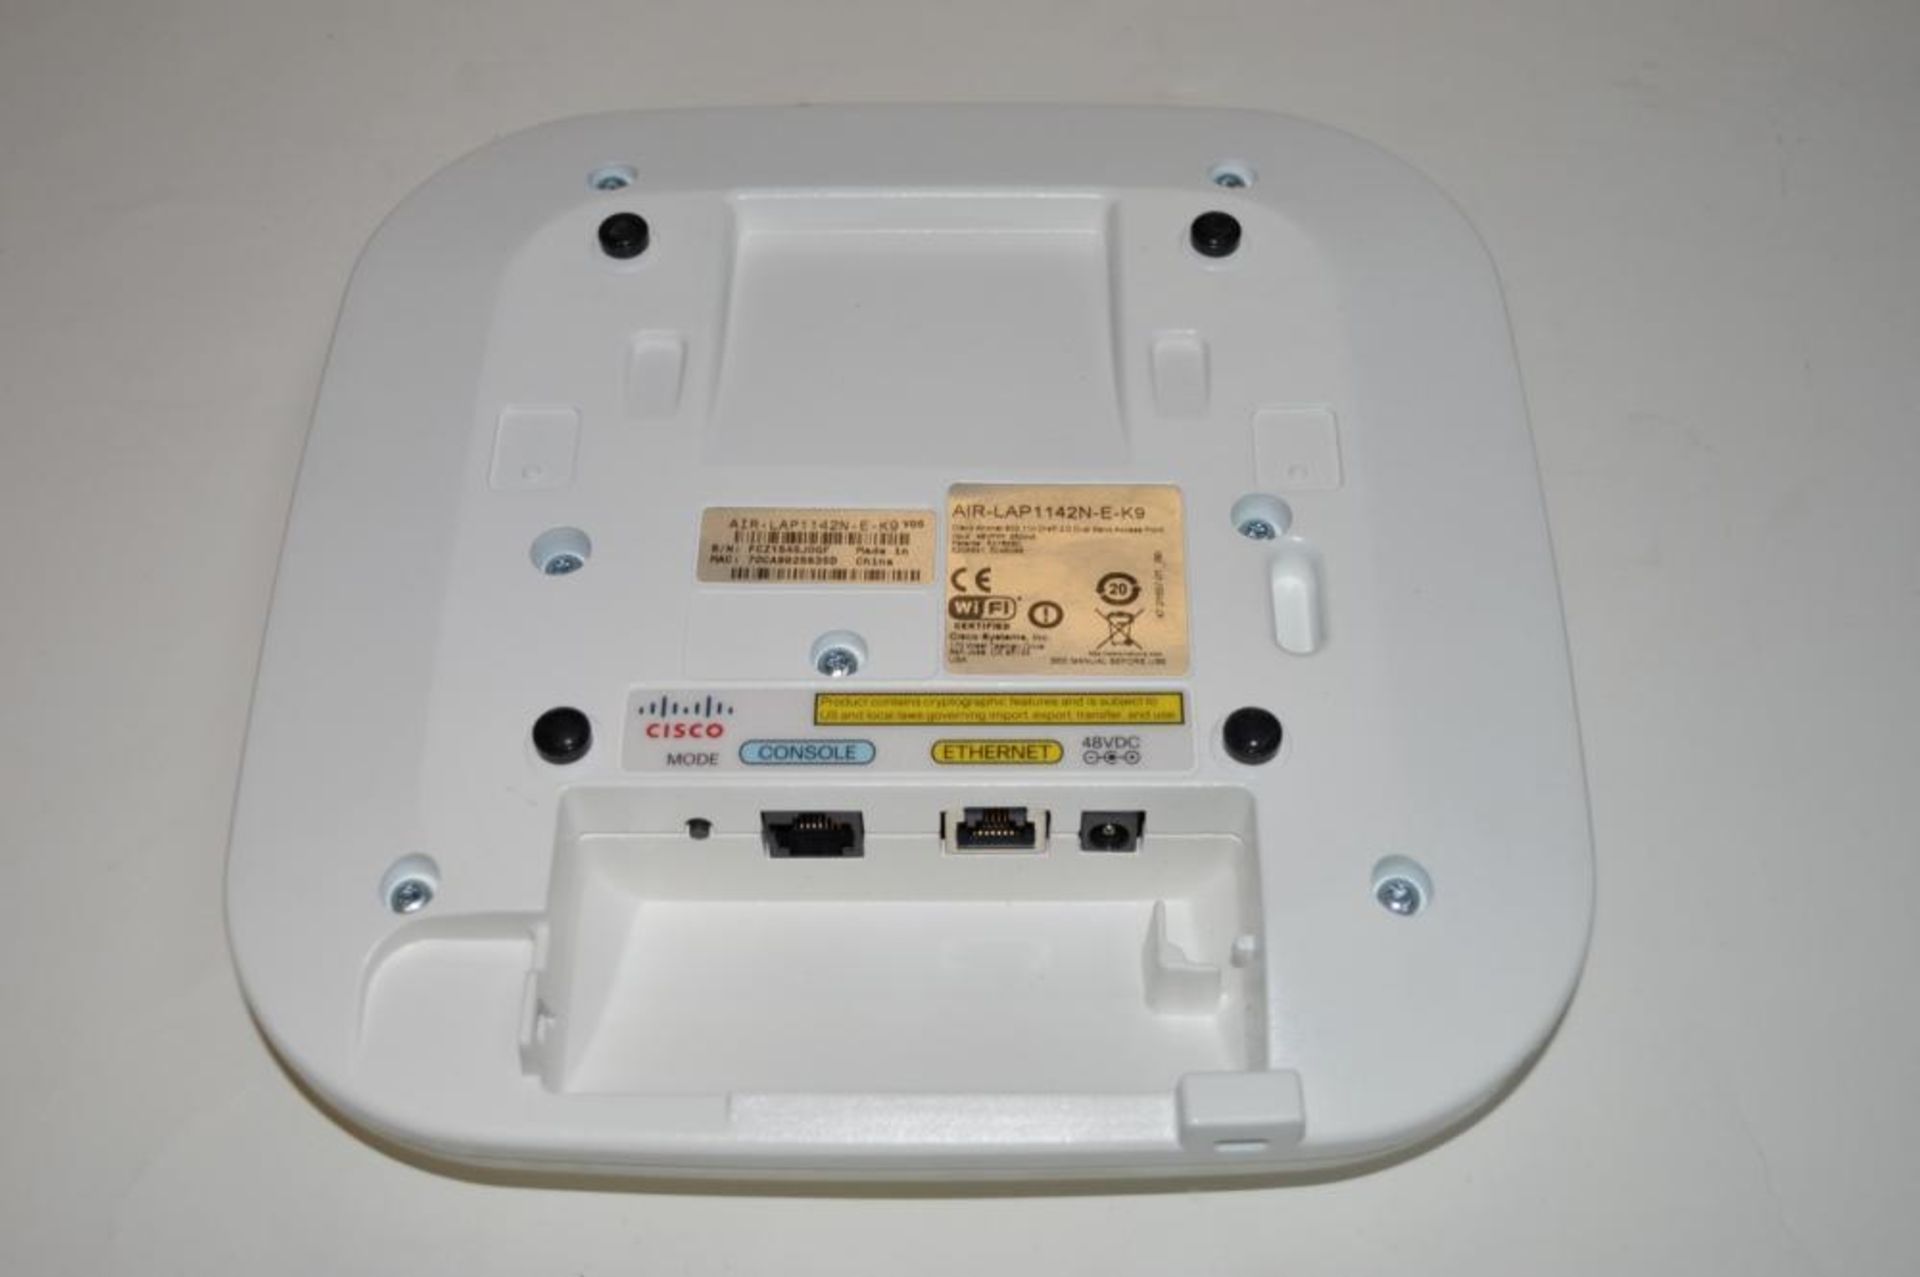 1 x Cisco AIR-LAP1142N-E-K9 Cisco AIR-LAP1142N-E-K9 Controller Based Radio Access Point Router - CL4 - Image 2 of 3